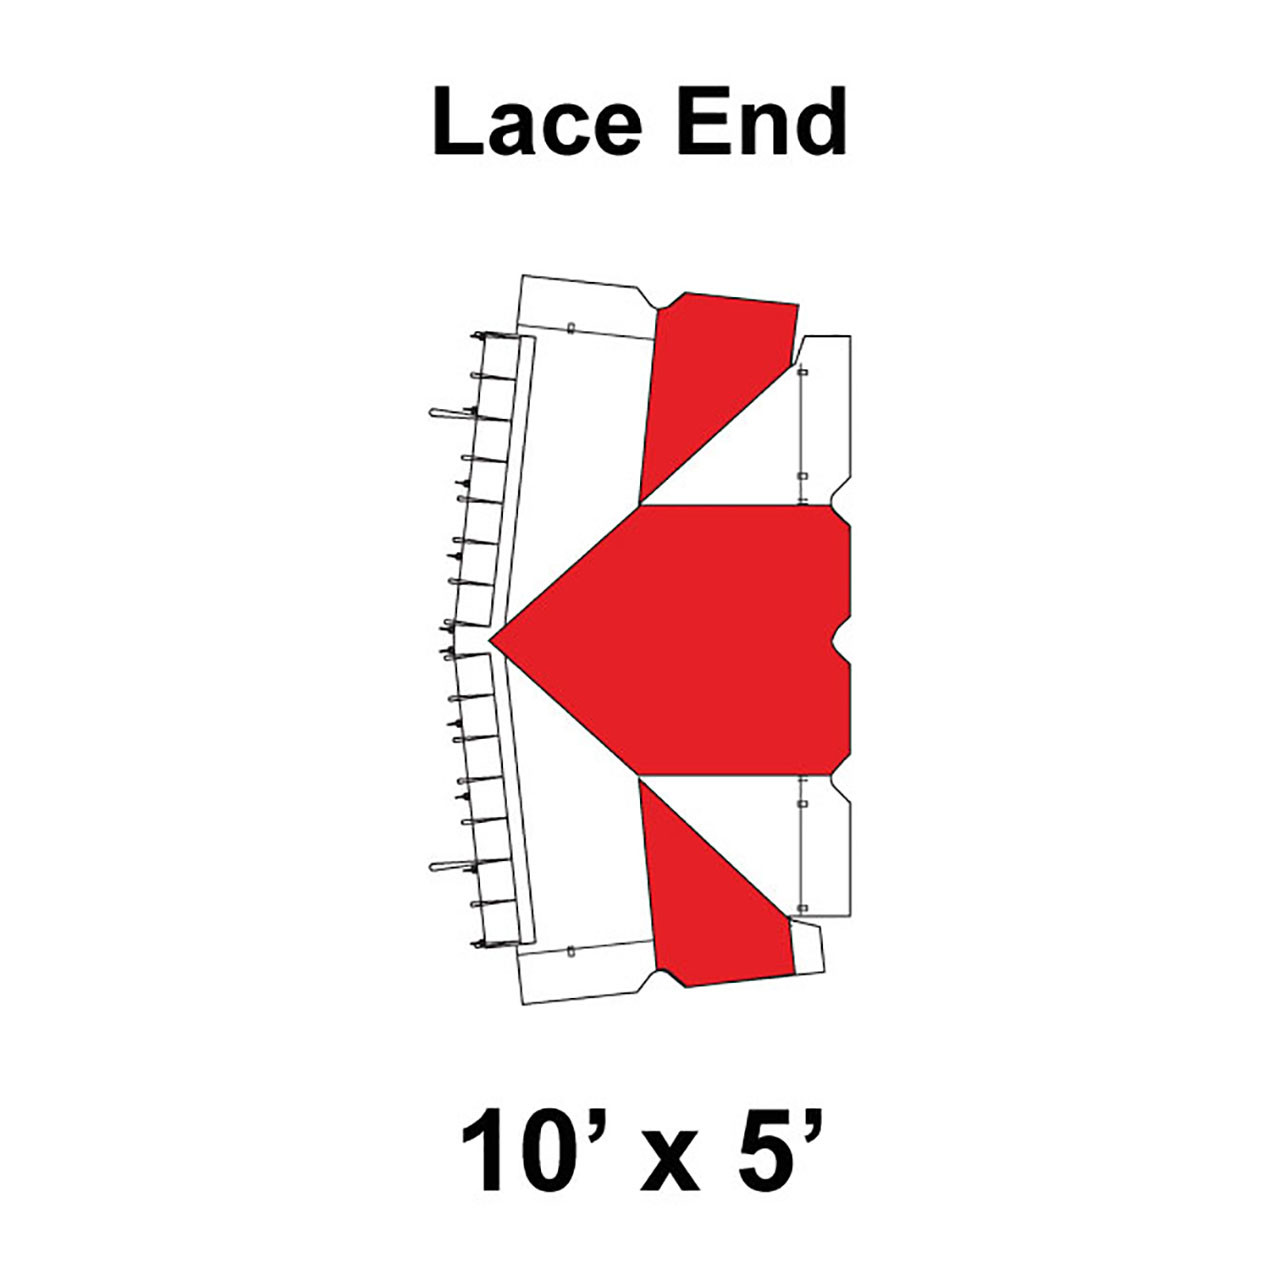 10' x 5' Classic Frame Tent Lace End, 16 oz. Ratchet Top, White and Red